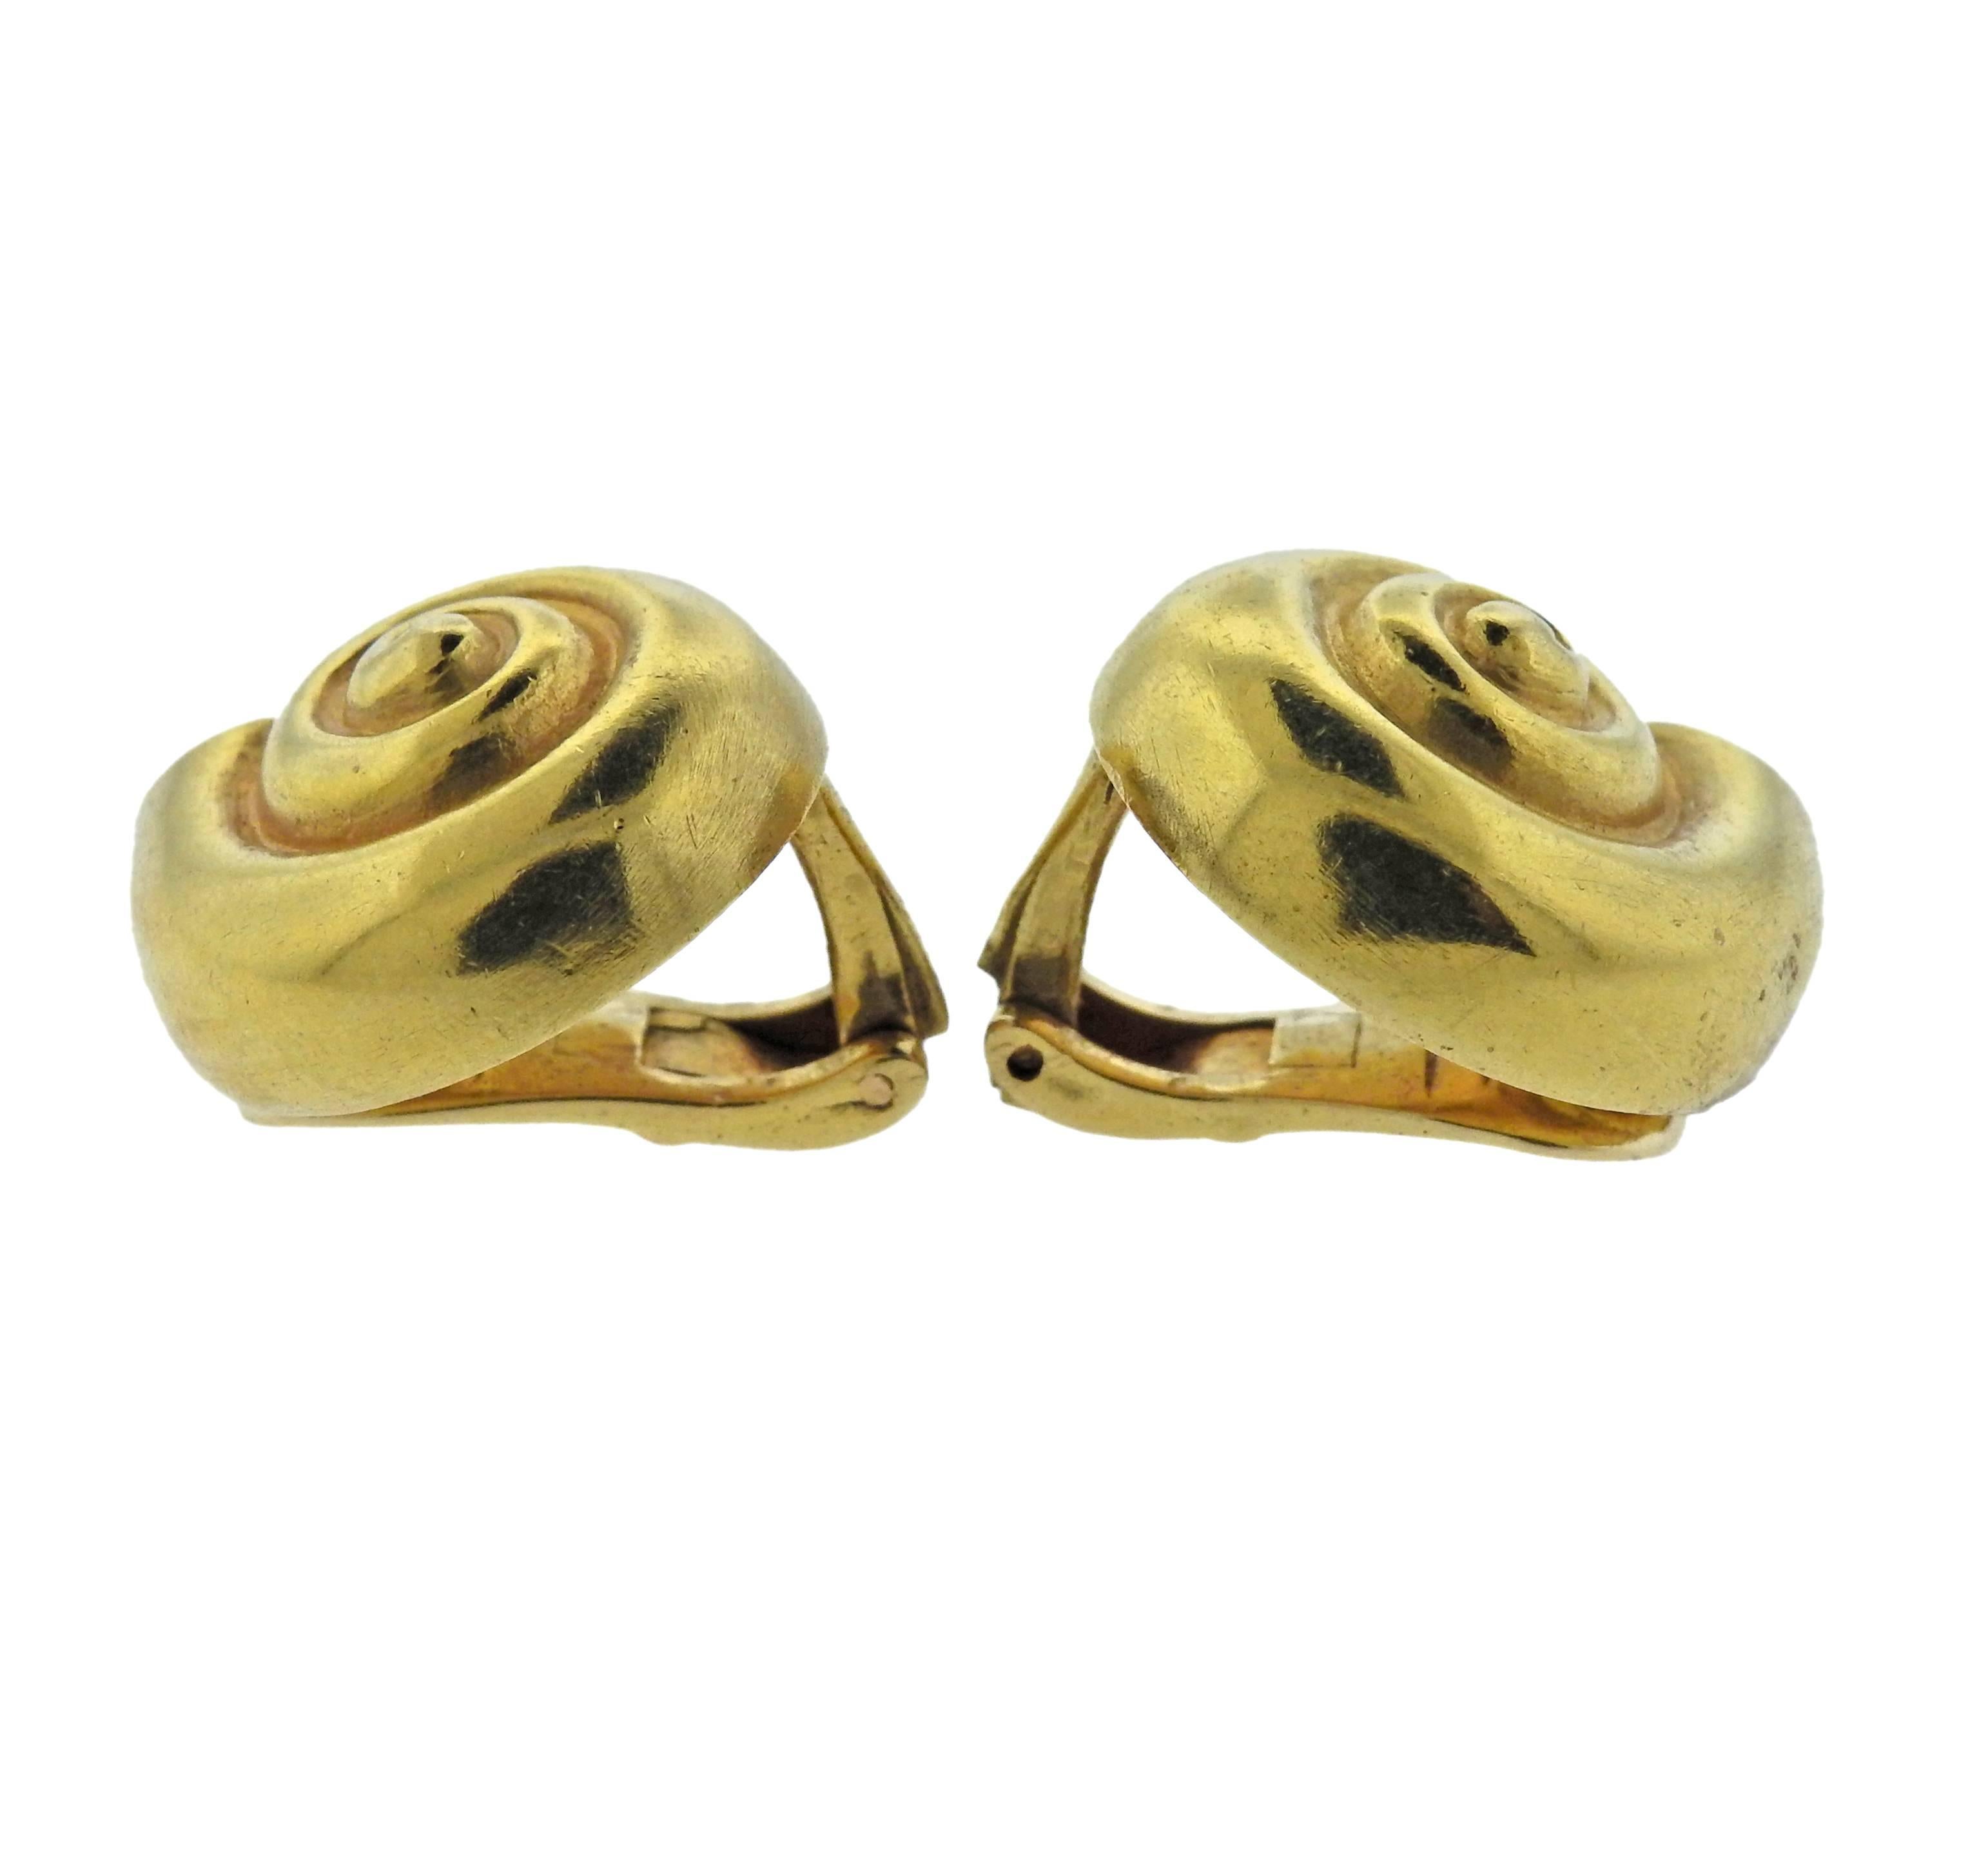  Pair of 18k yellow gold shell motif earrings, crafted by Greek designer Ilias Lalaounis. Earrings are 20mm x 17mm, weigh 12.5 grams. Marked: 750, A21, Greece, Maker's mark. 